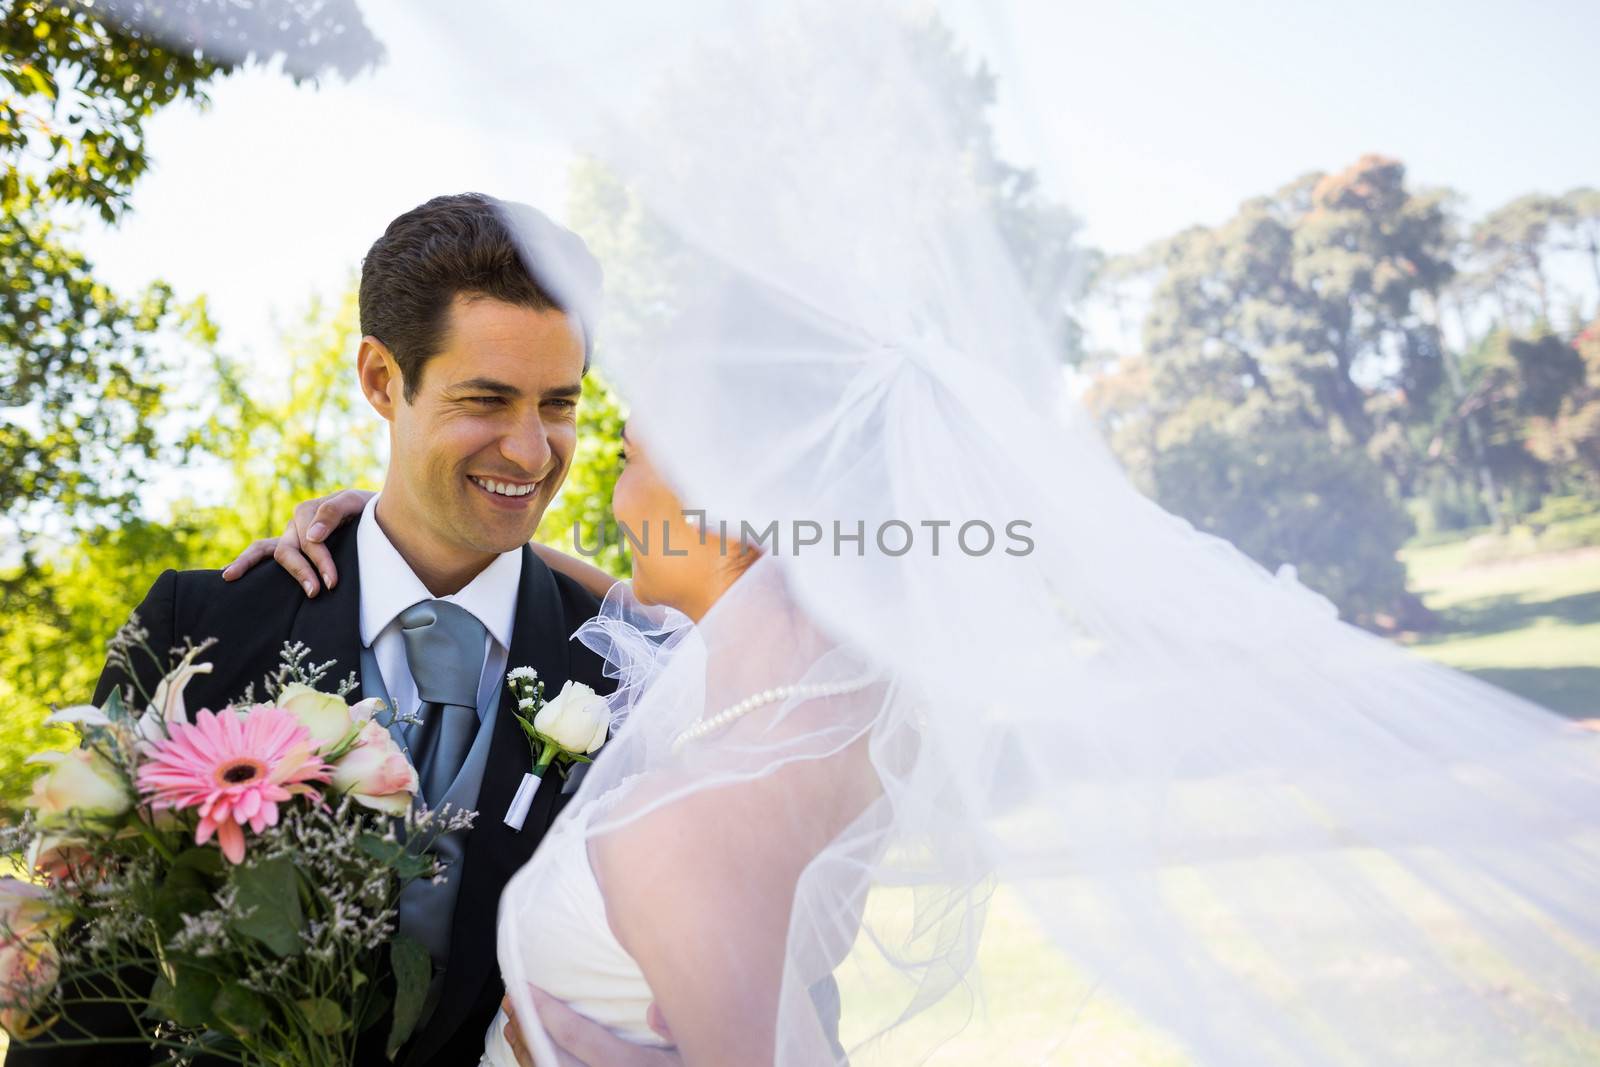 Romantic newlywed looking at each other in park by Wavebreakmedia